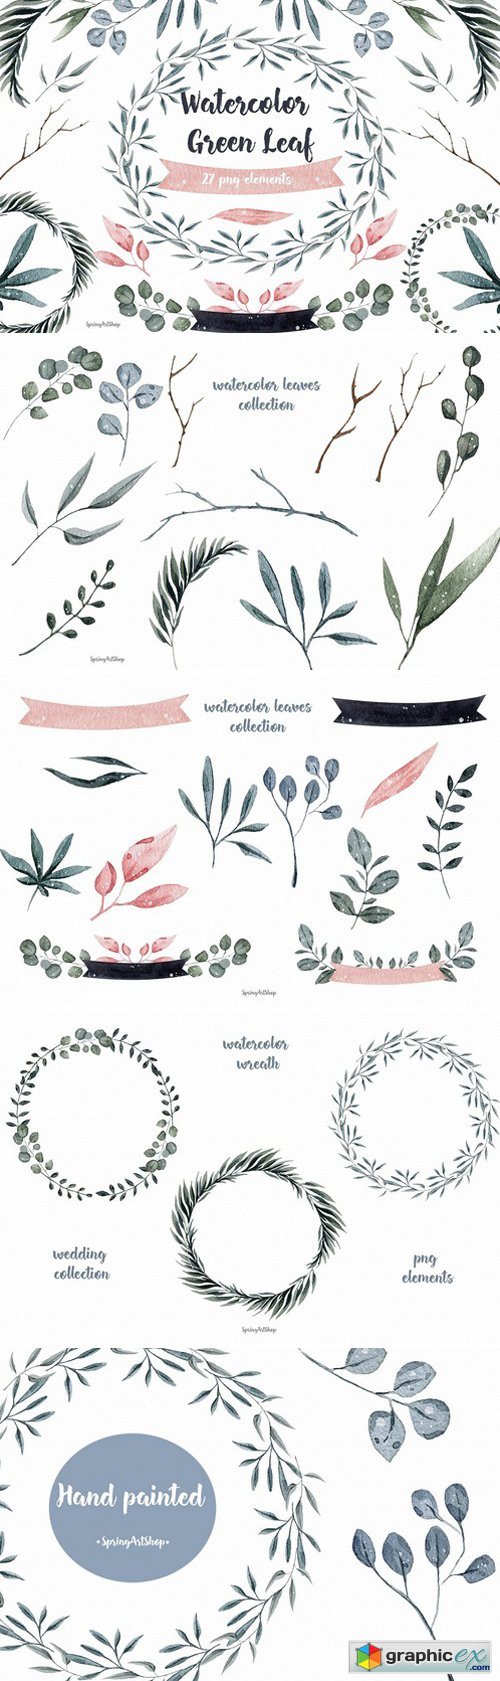 Watercolor Clipart Green Leaf